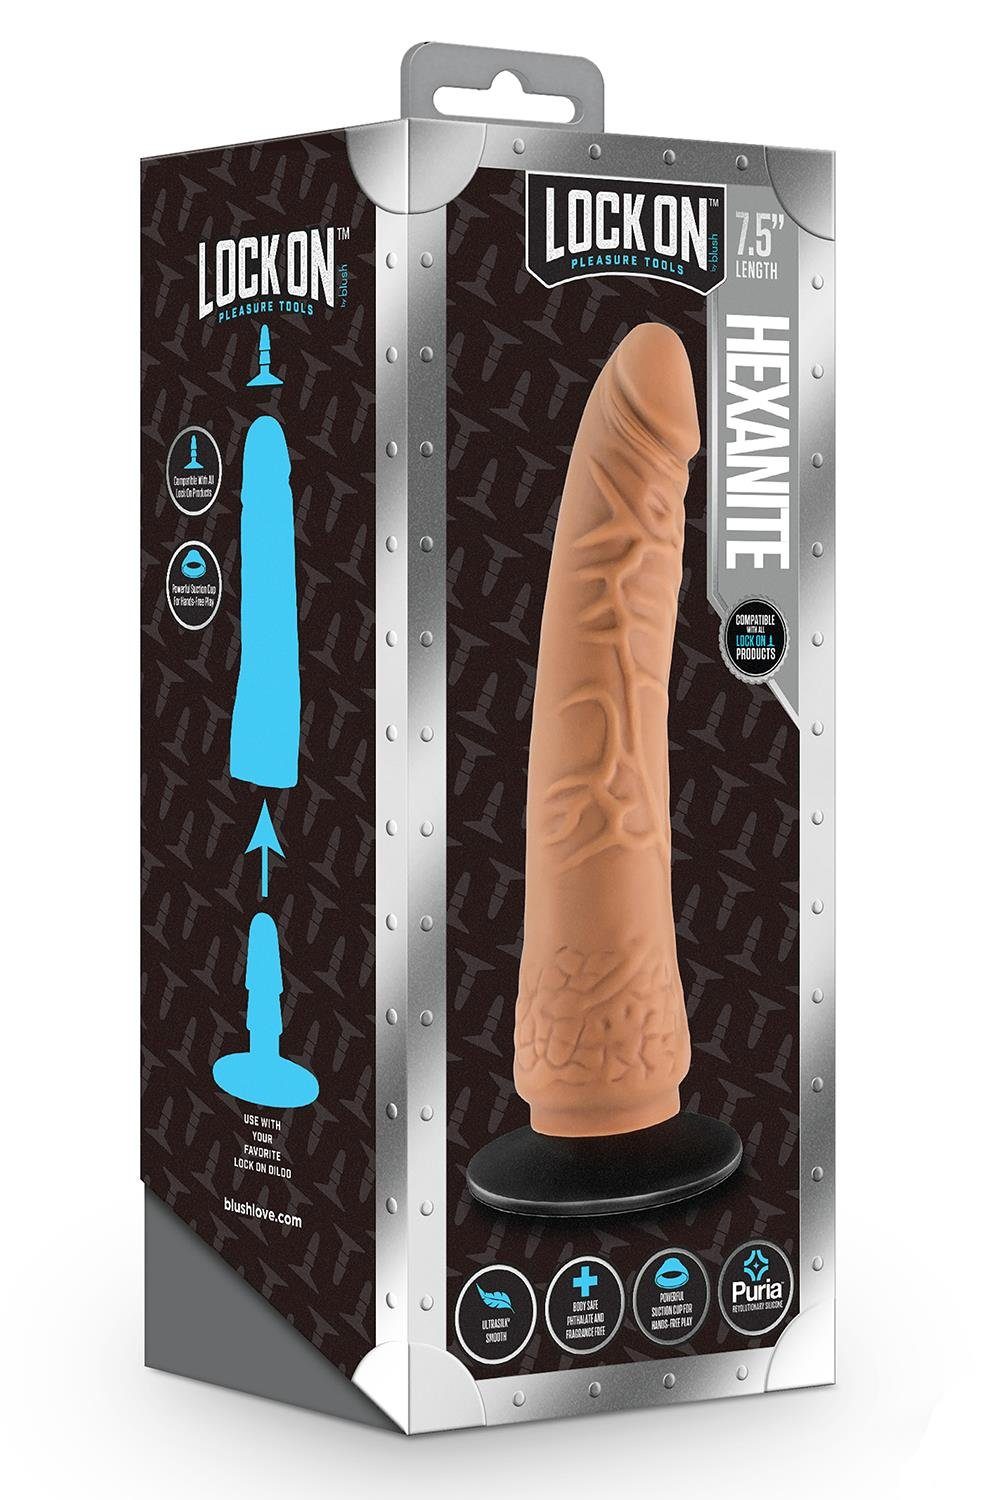 7.5 Dildo Blush Hexanite Lock With Mocha Inch Suction Dildo 19cm Adapter Cup On